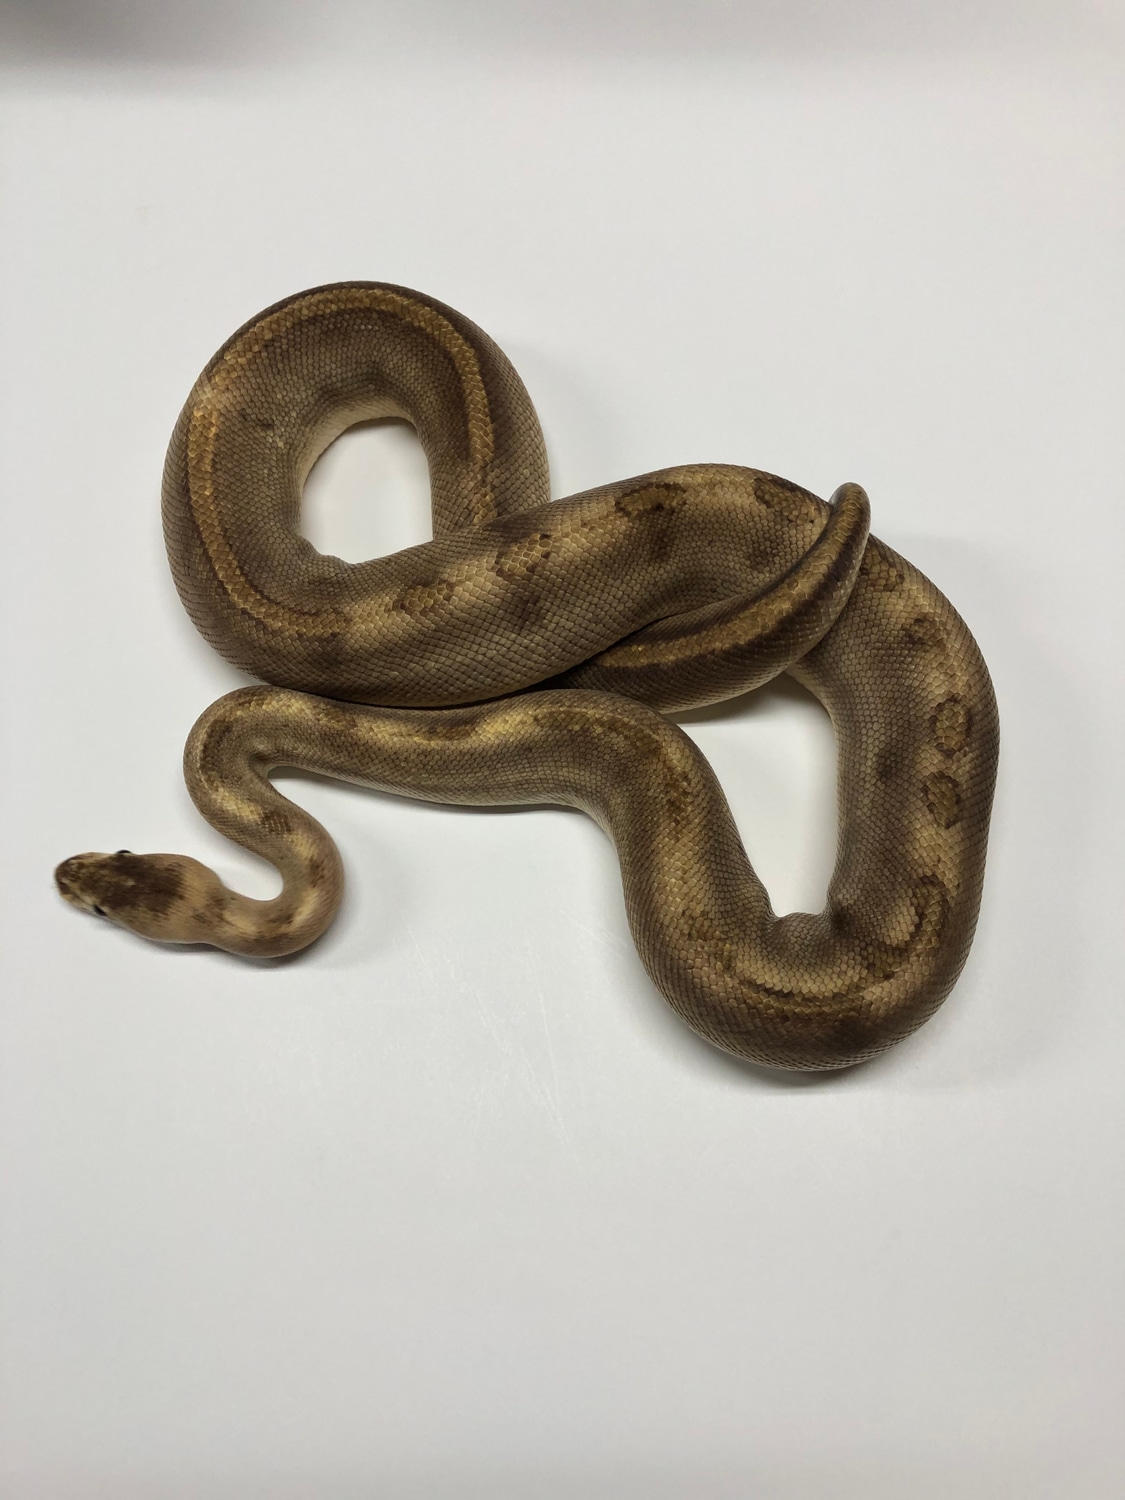 Champagne Ball Python by Synergy Reptiles